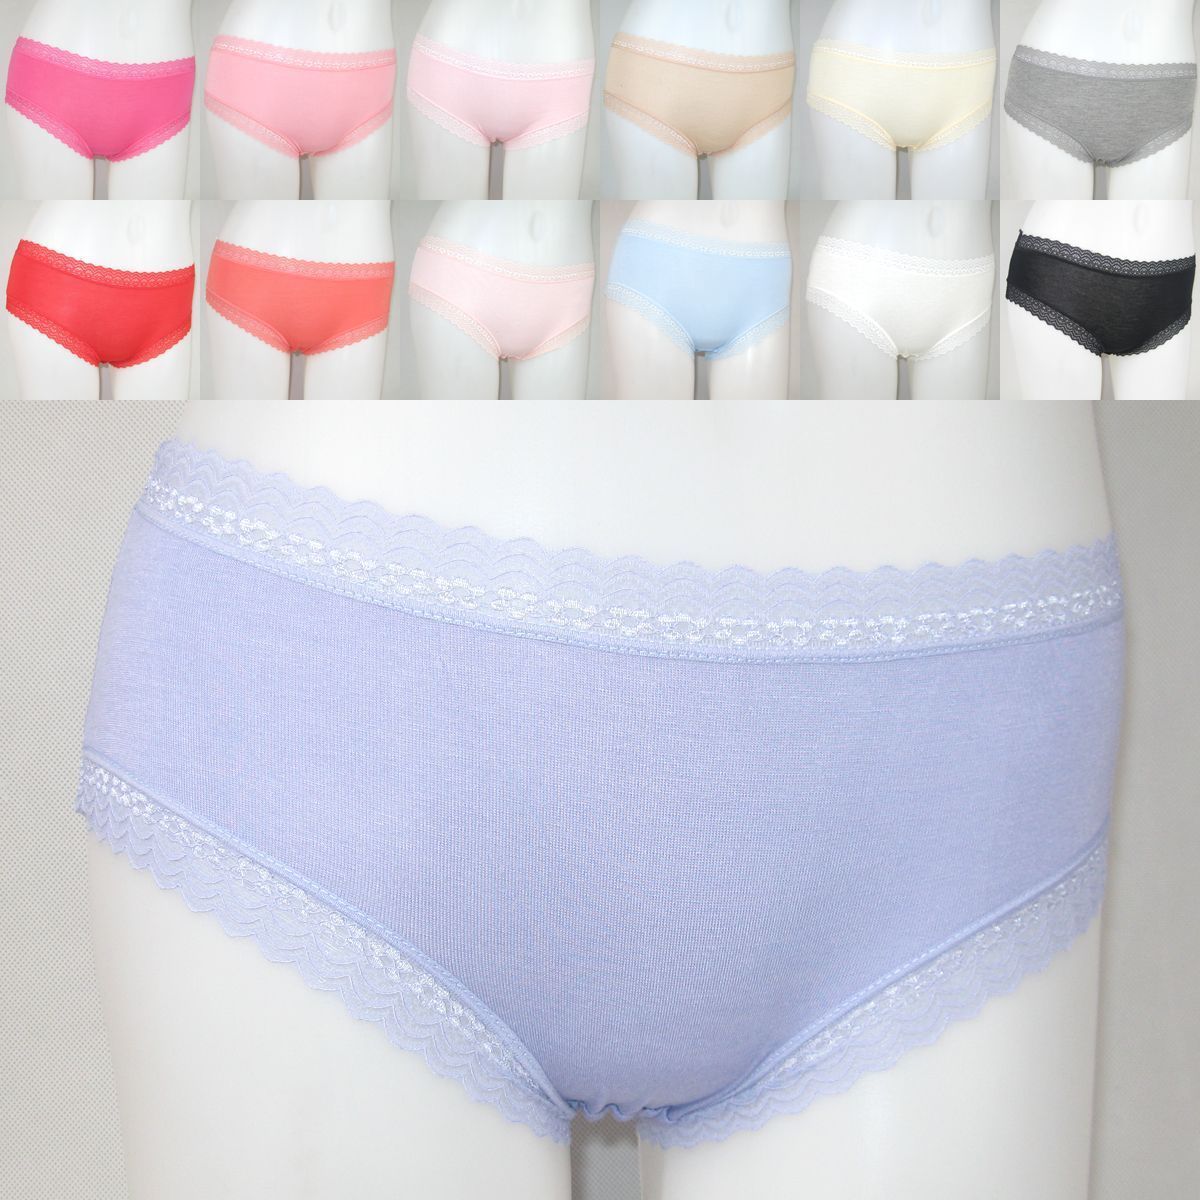 43010 # package buttocks non-trace modal in the waist high stretch breathable modal ladies comfortable underwear